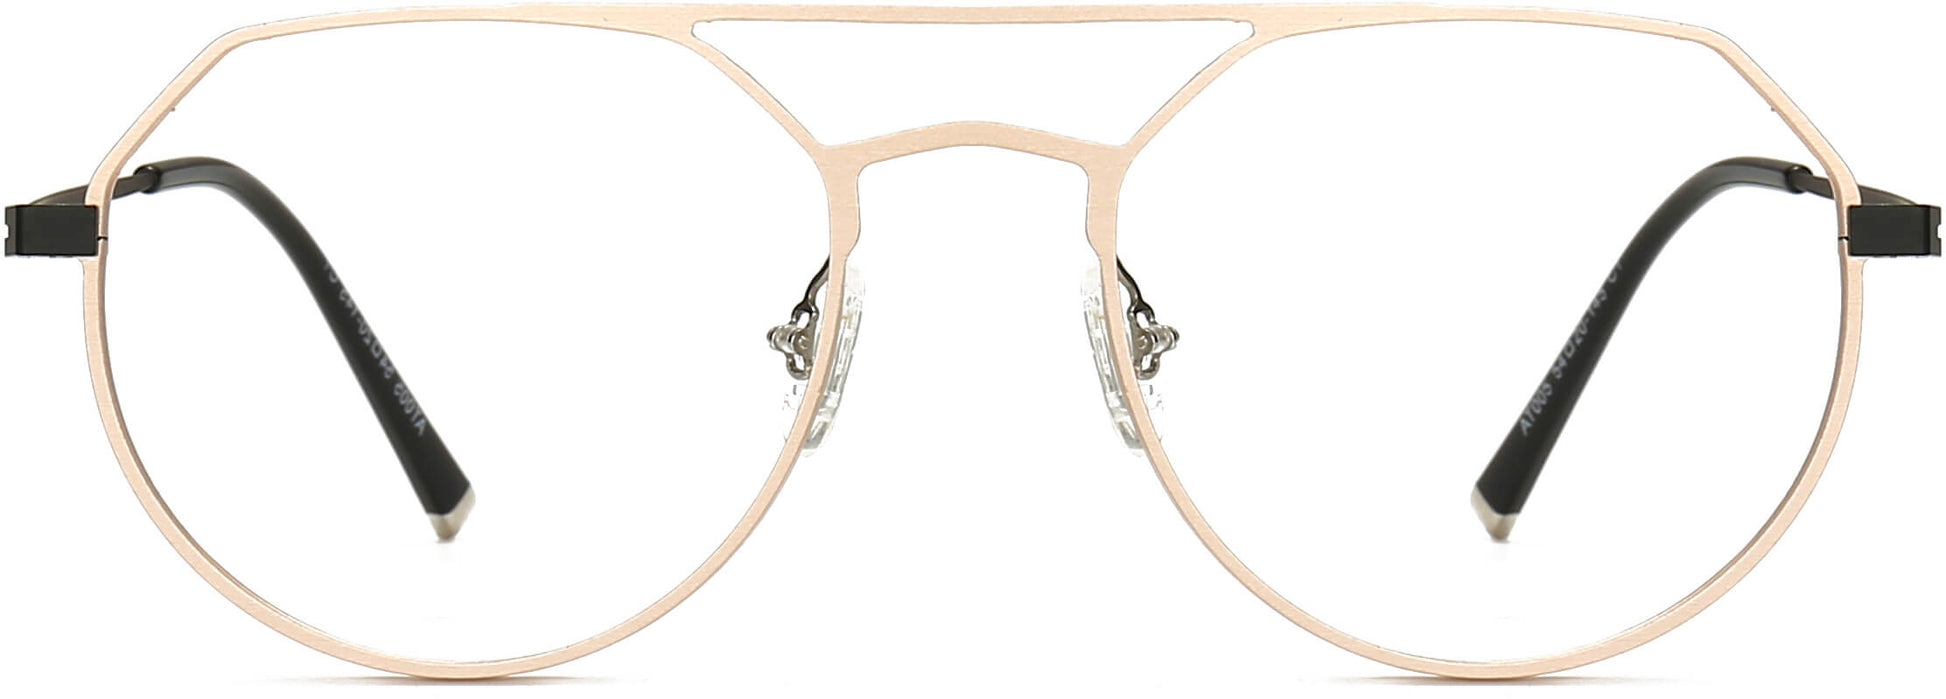 Dfiyy Round Gold Eyeglasses from ANRRI, front view